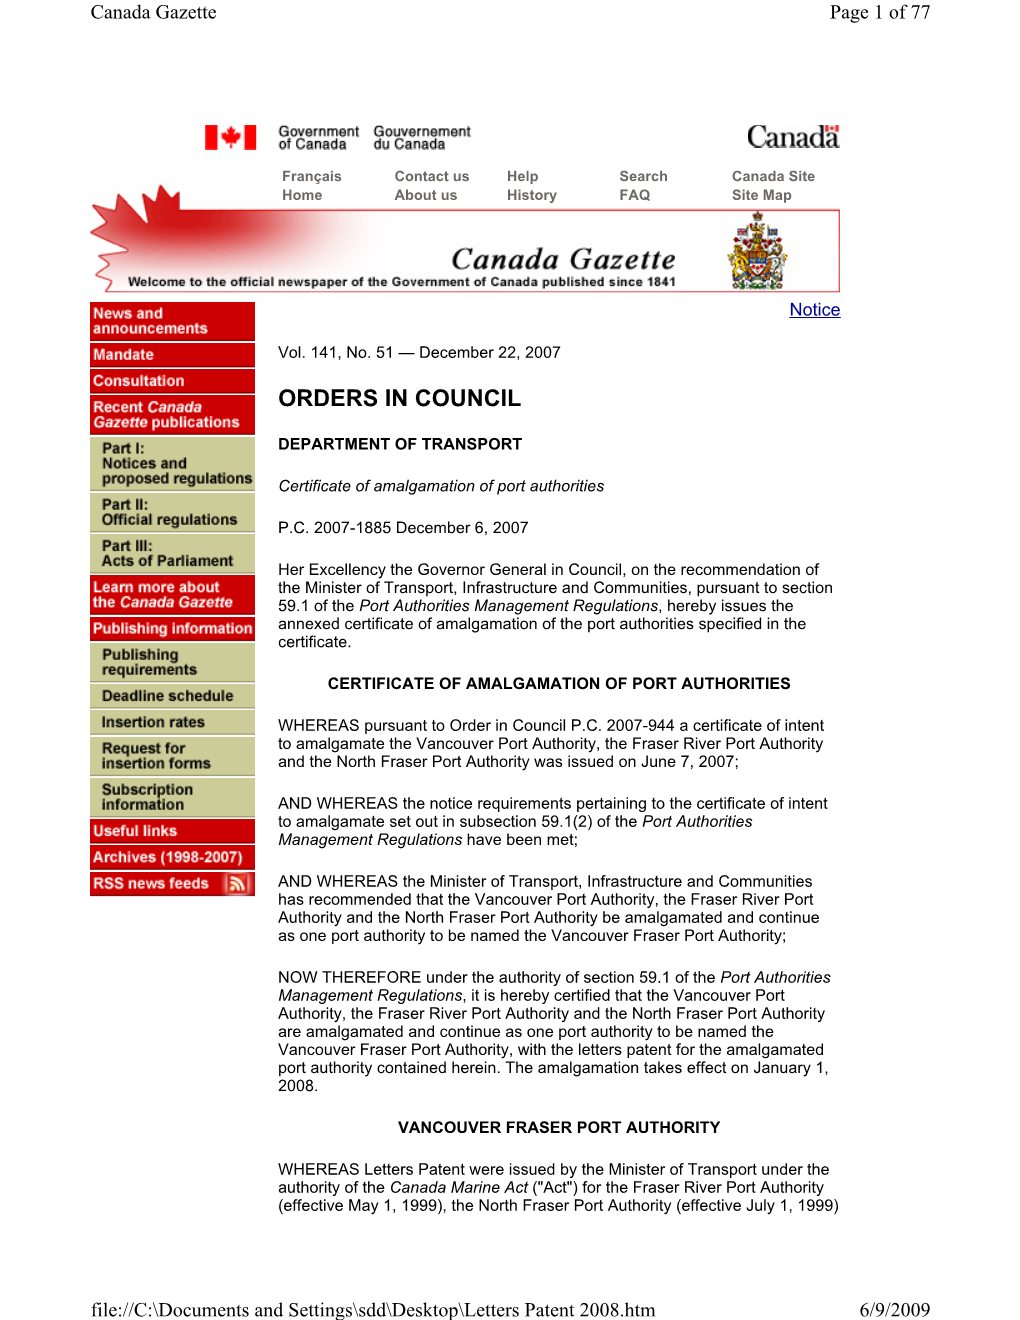 Vancouver Fraser Port Authority Letters Patent